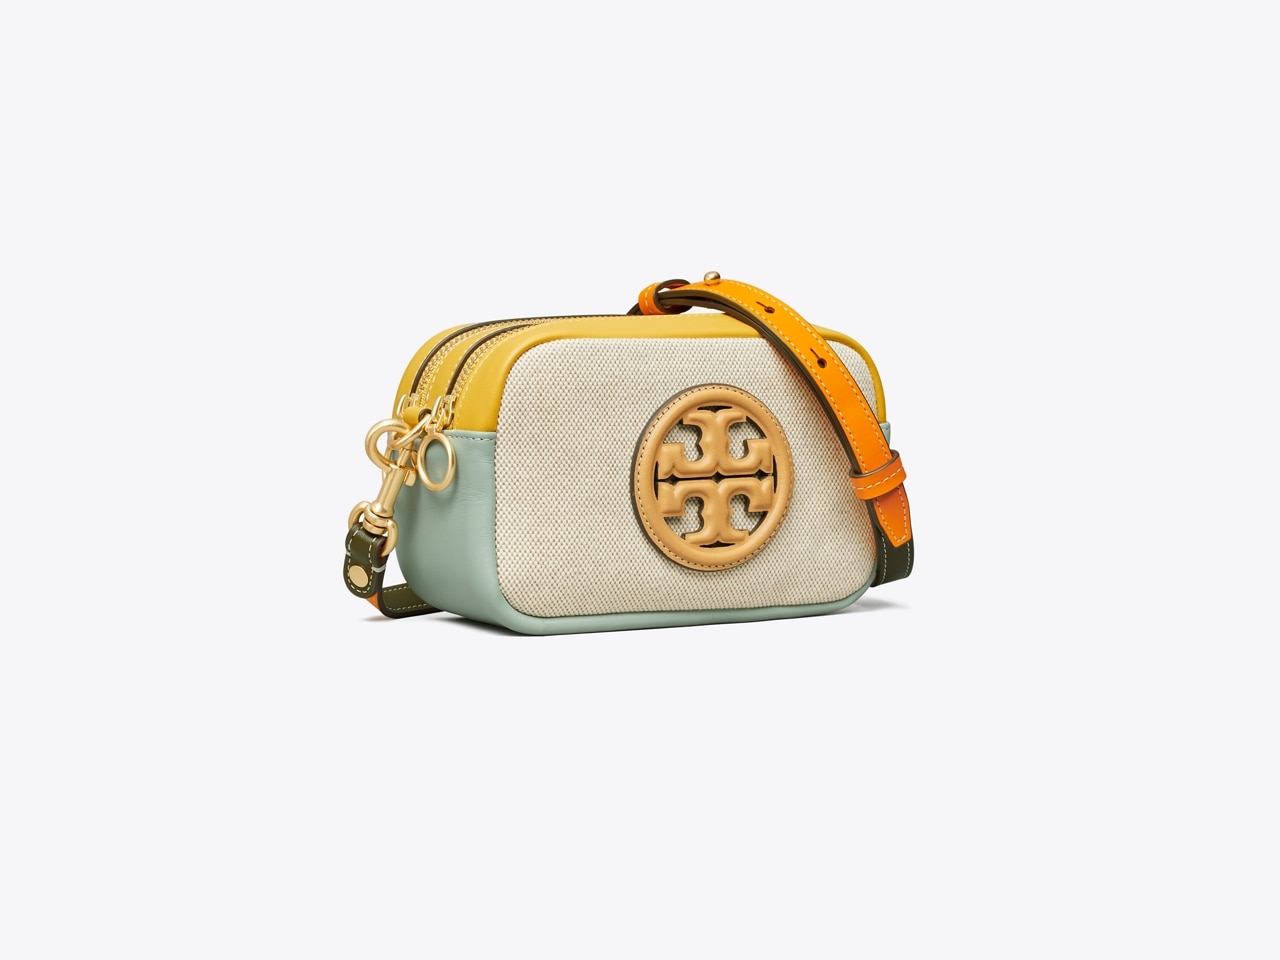 Tory Burch Miller Canvas & Leather Crossbody Bag In Natural